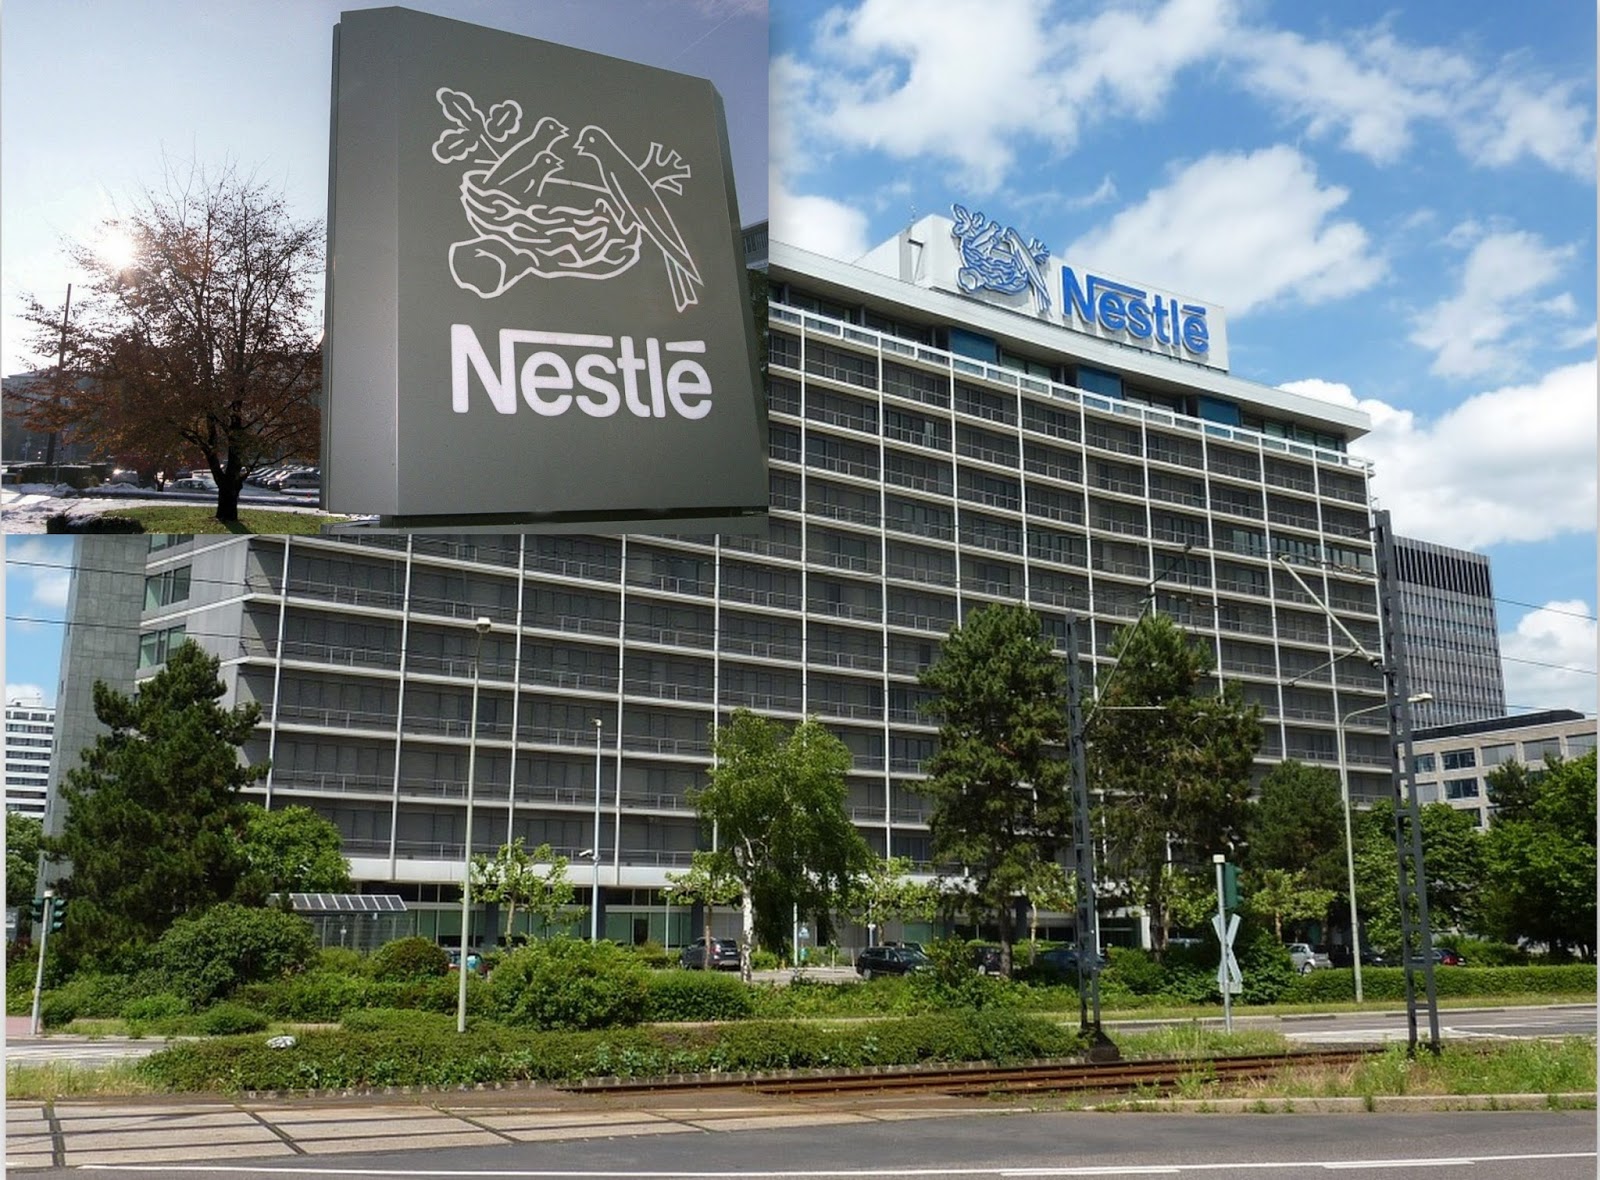 Nestlé is One the Most Evil Corporations in the World